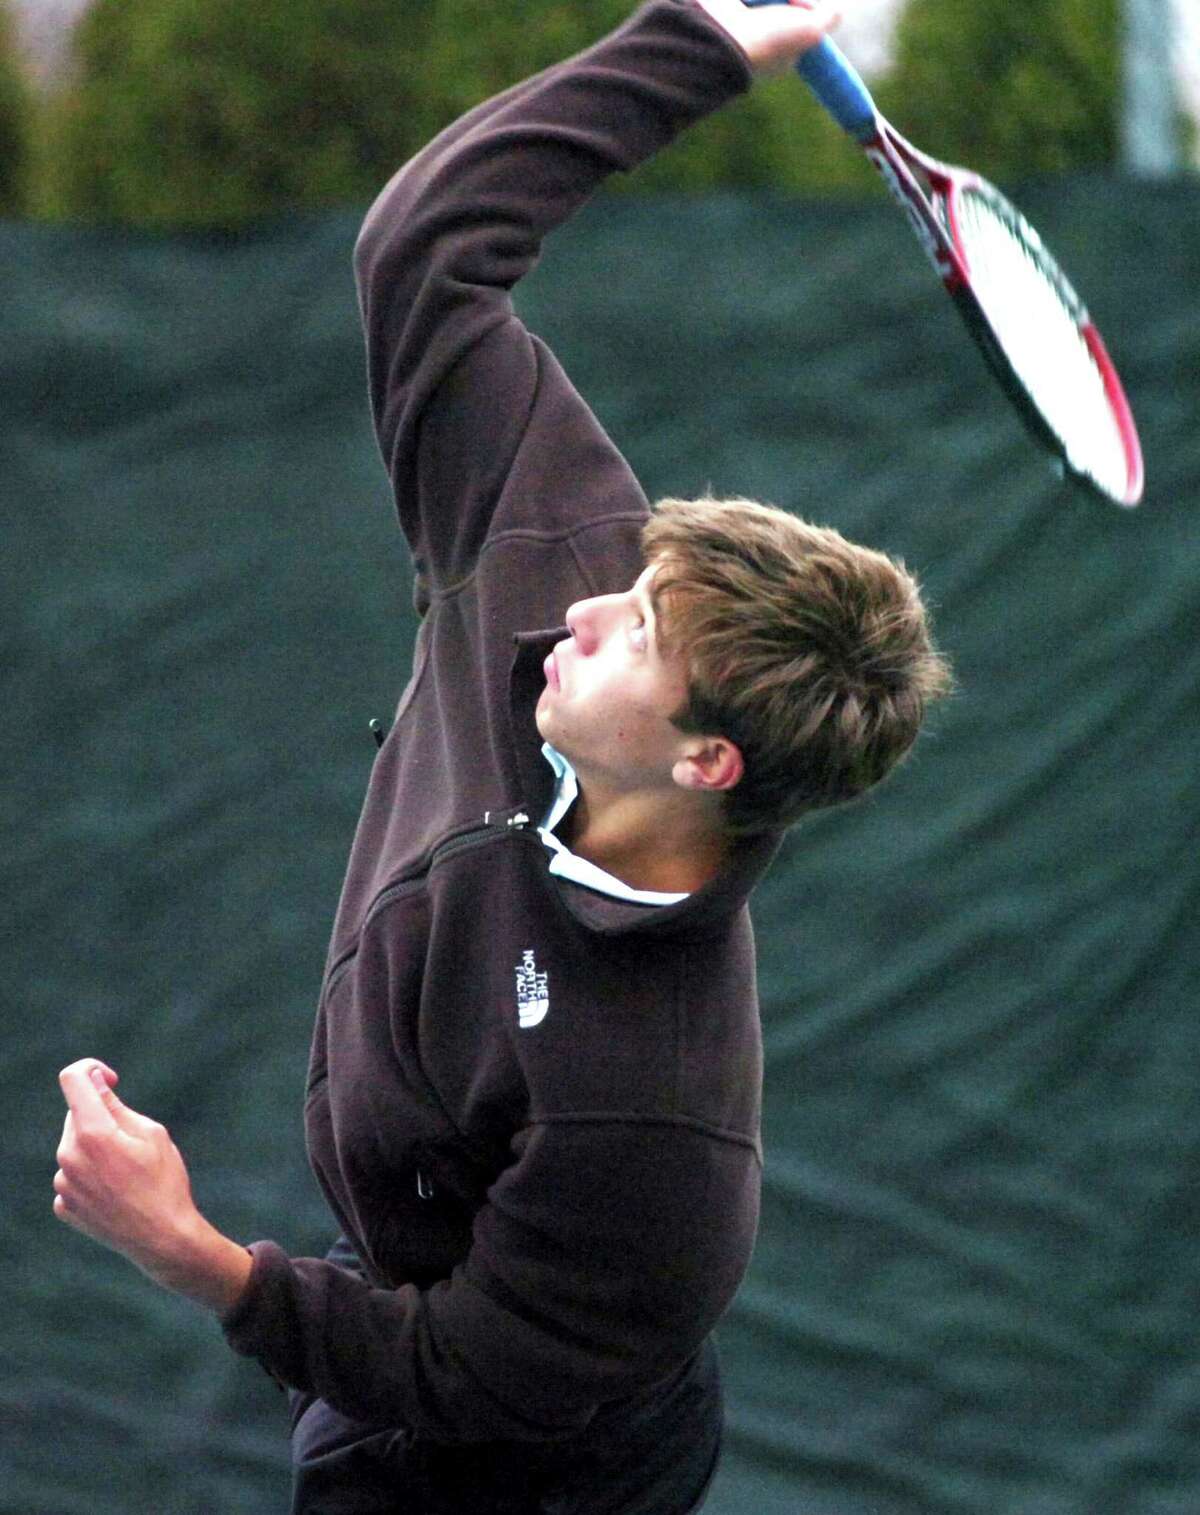 The Brunswick tennis team has to find a replacement for John Brosens who is now playing his tennis at Georgetown University.